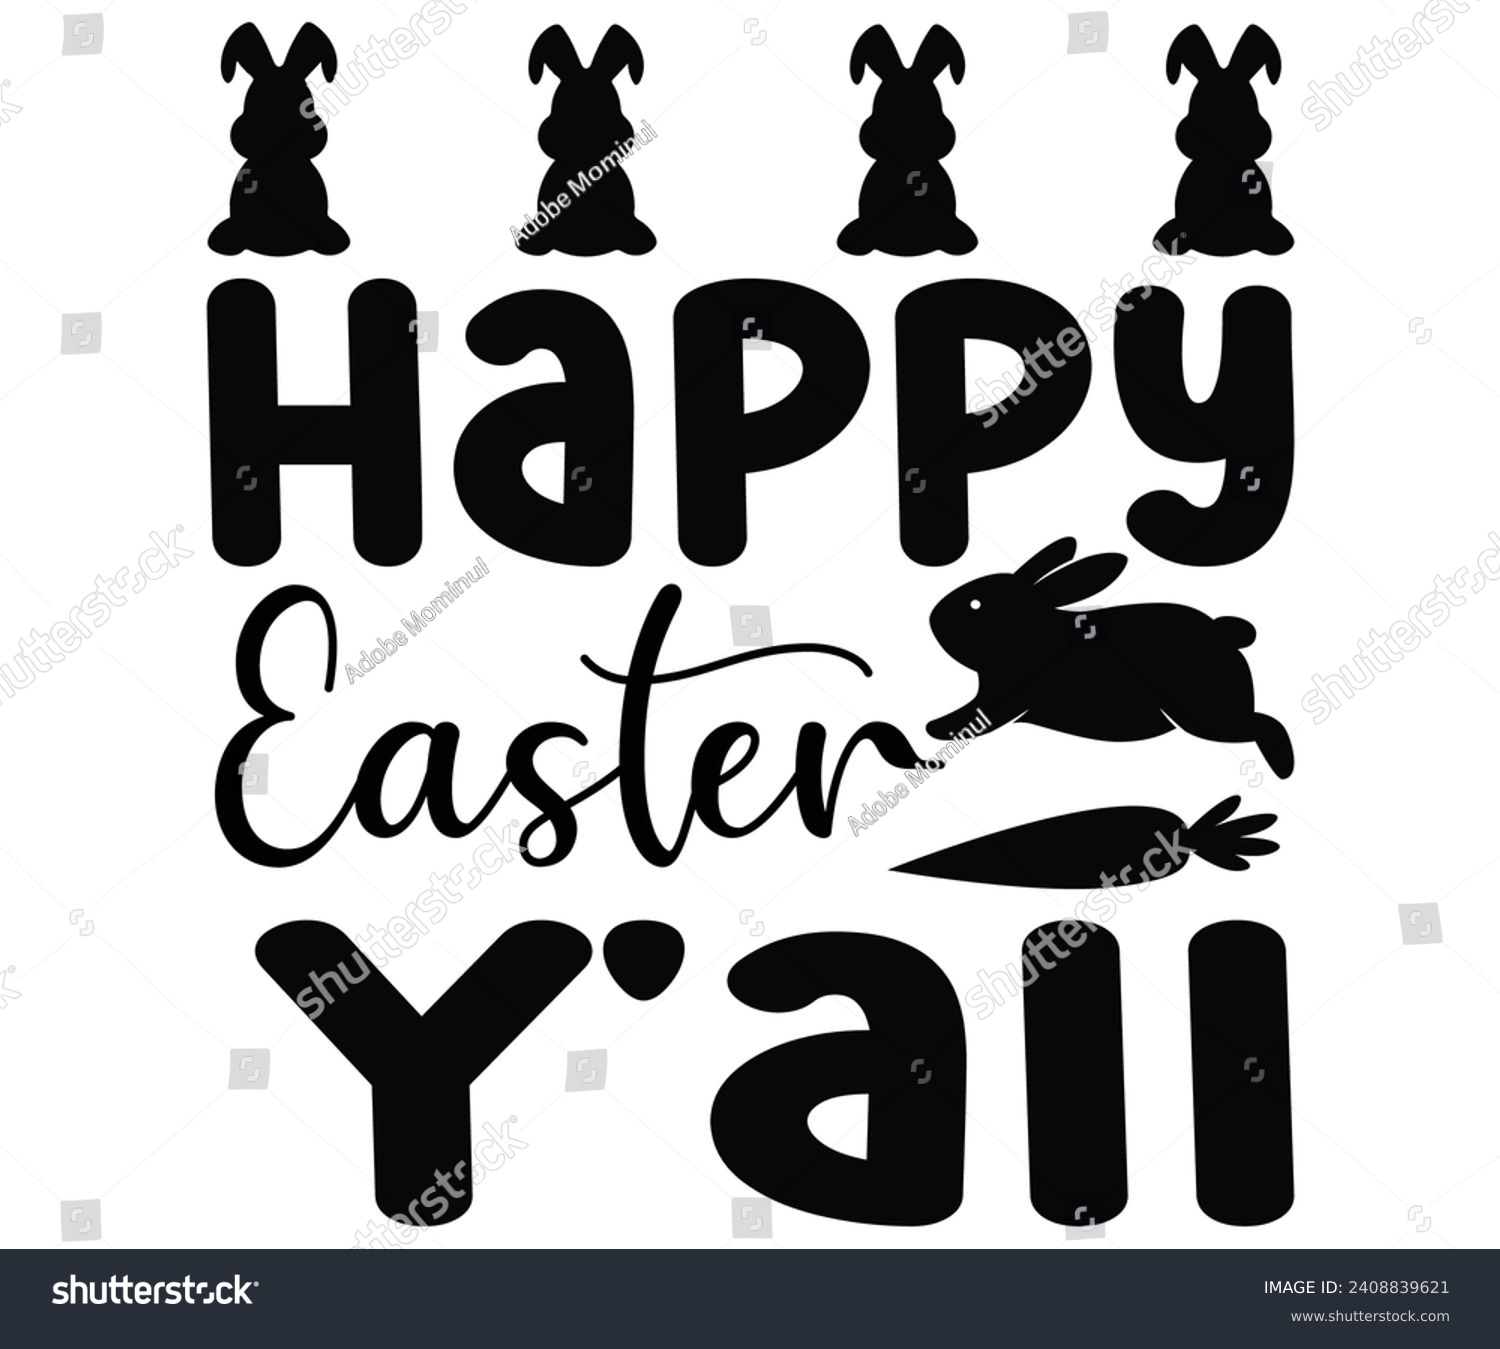 SVG of Happy Easter Y'all Svg,Happy Easter Svg,Png,Bunny Svg,Retro Easter Svg,Easter Quotes,Spring Svg,Easter Shirt Svg,Easter Gift Svg,Funny Easter Svg,Bunny Day, Egg for Kids,Cut Files,Cricut, svg